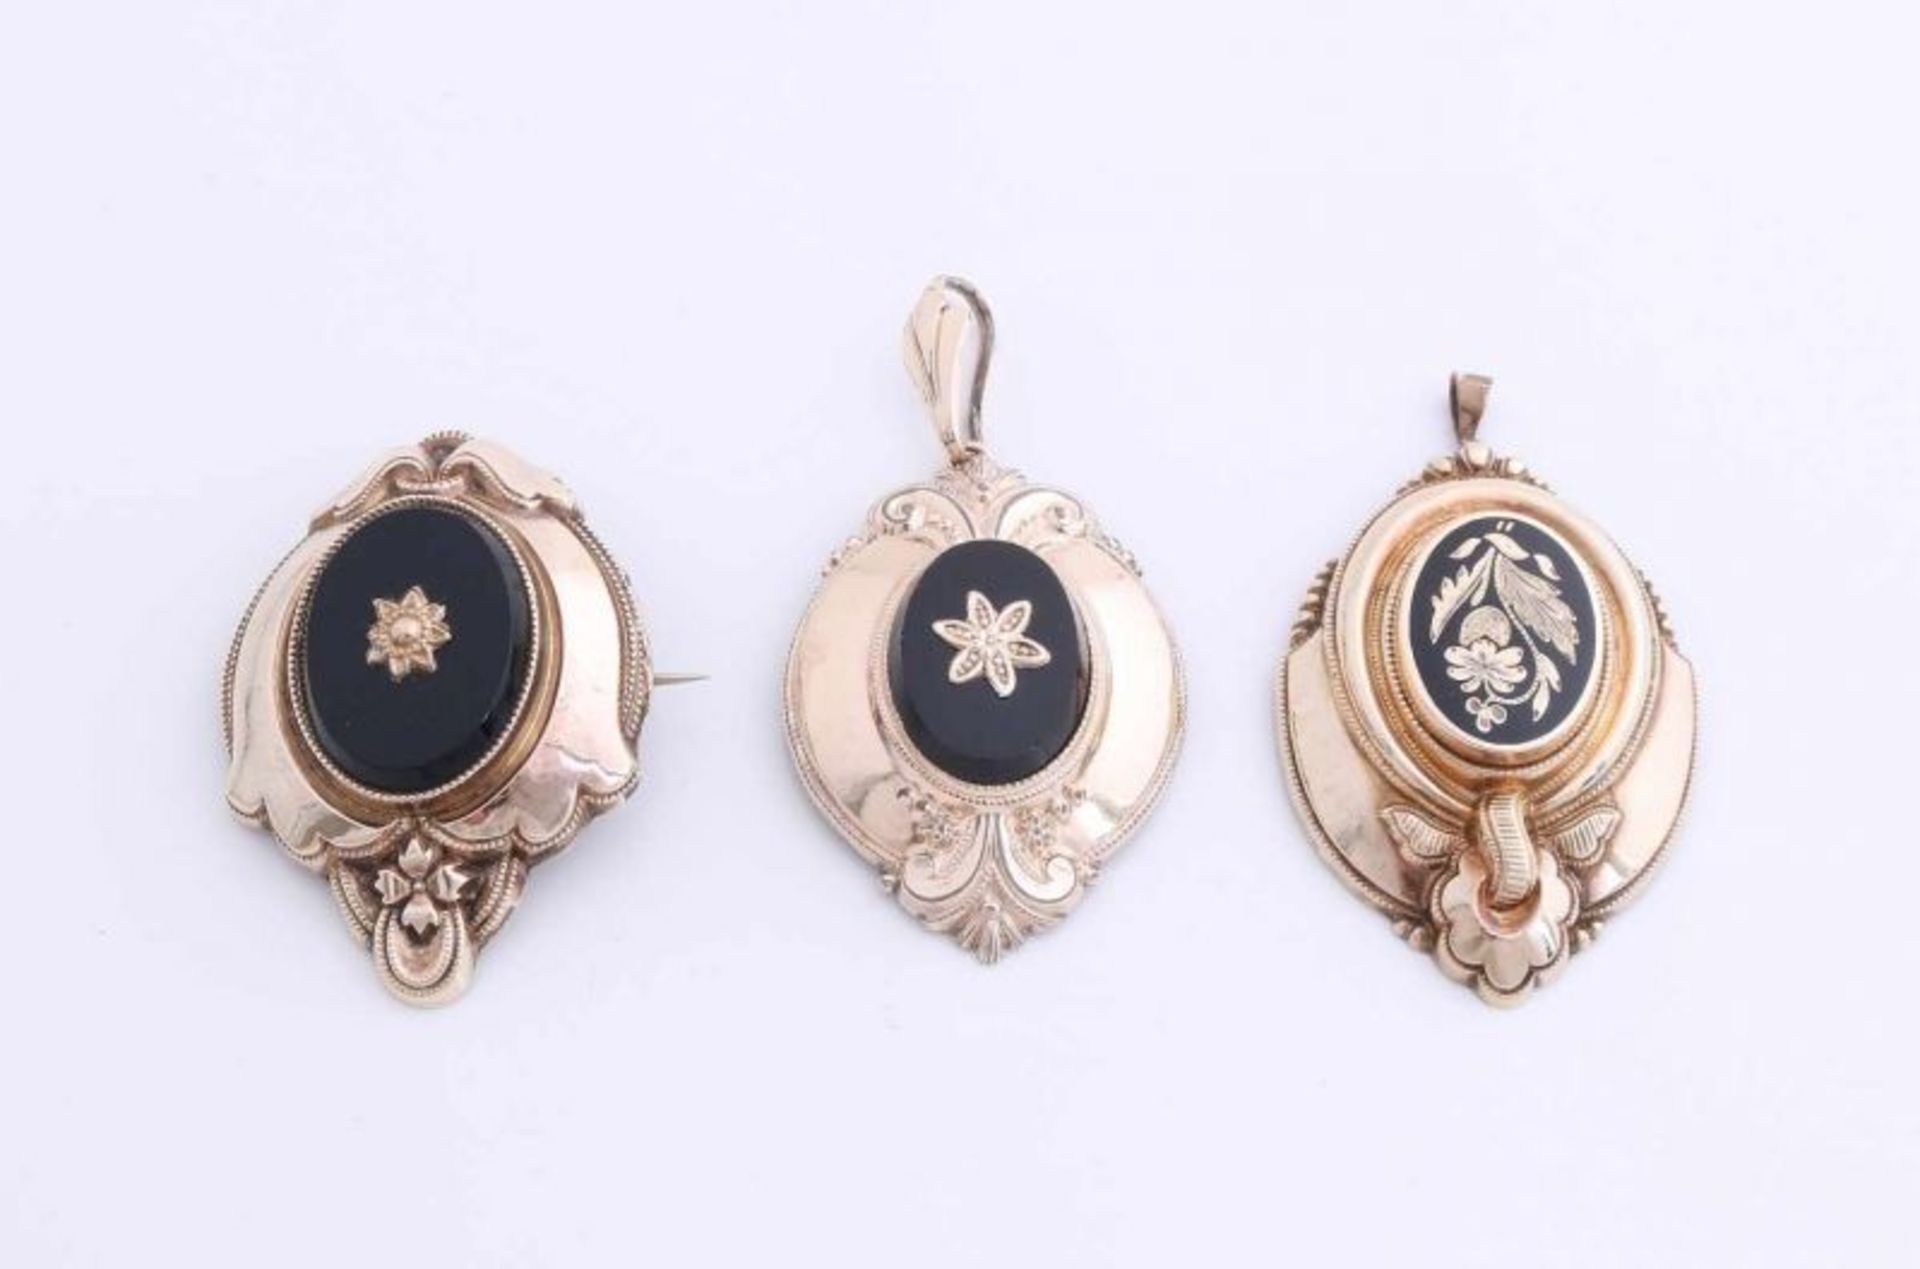 Brooch and two pendants with a shield from silver with a gold shield with onyx and enamel. Size